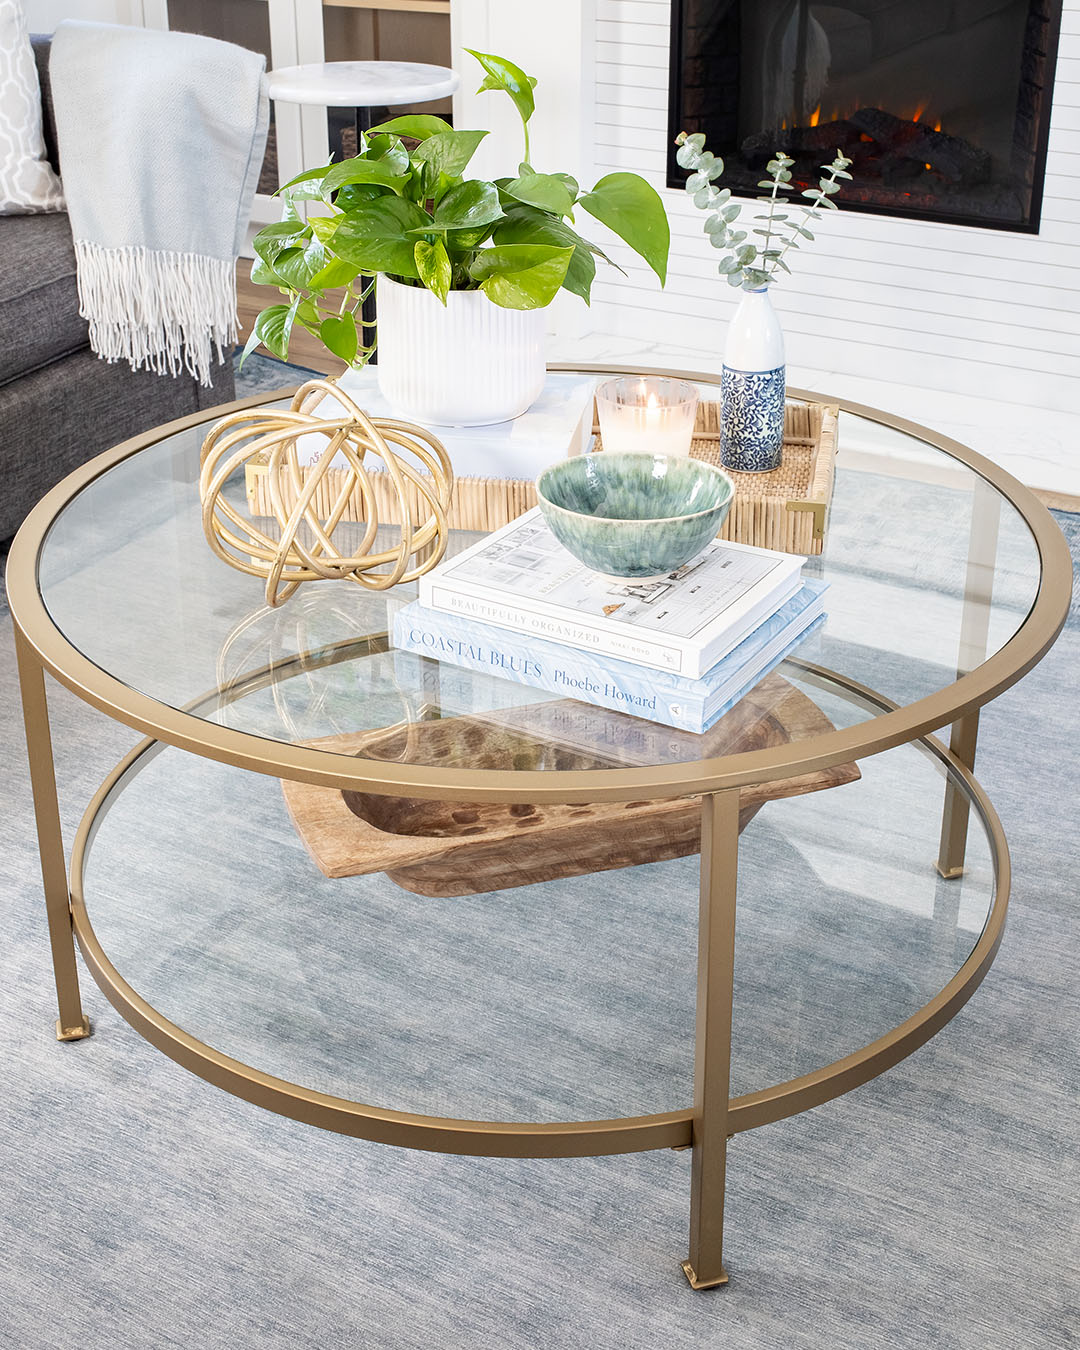 Today I thought I'd share a little peek at what our living room looks like right now and maybe give you a few ideas for styling a small round coffee table.